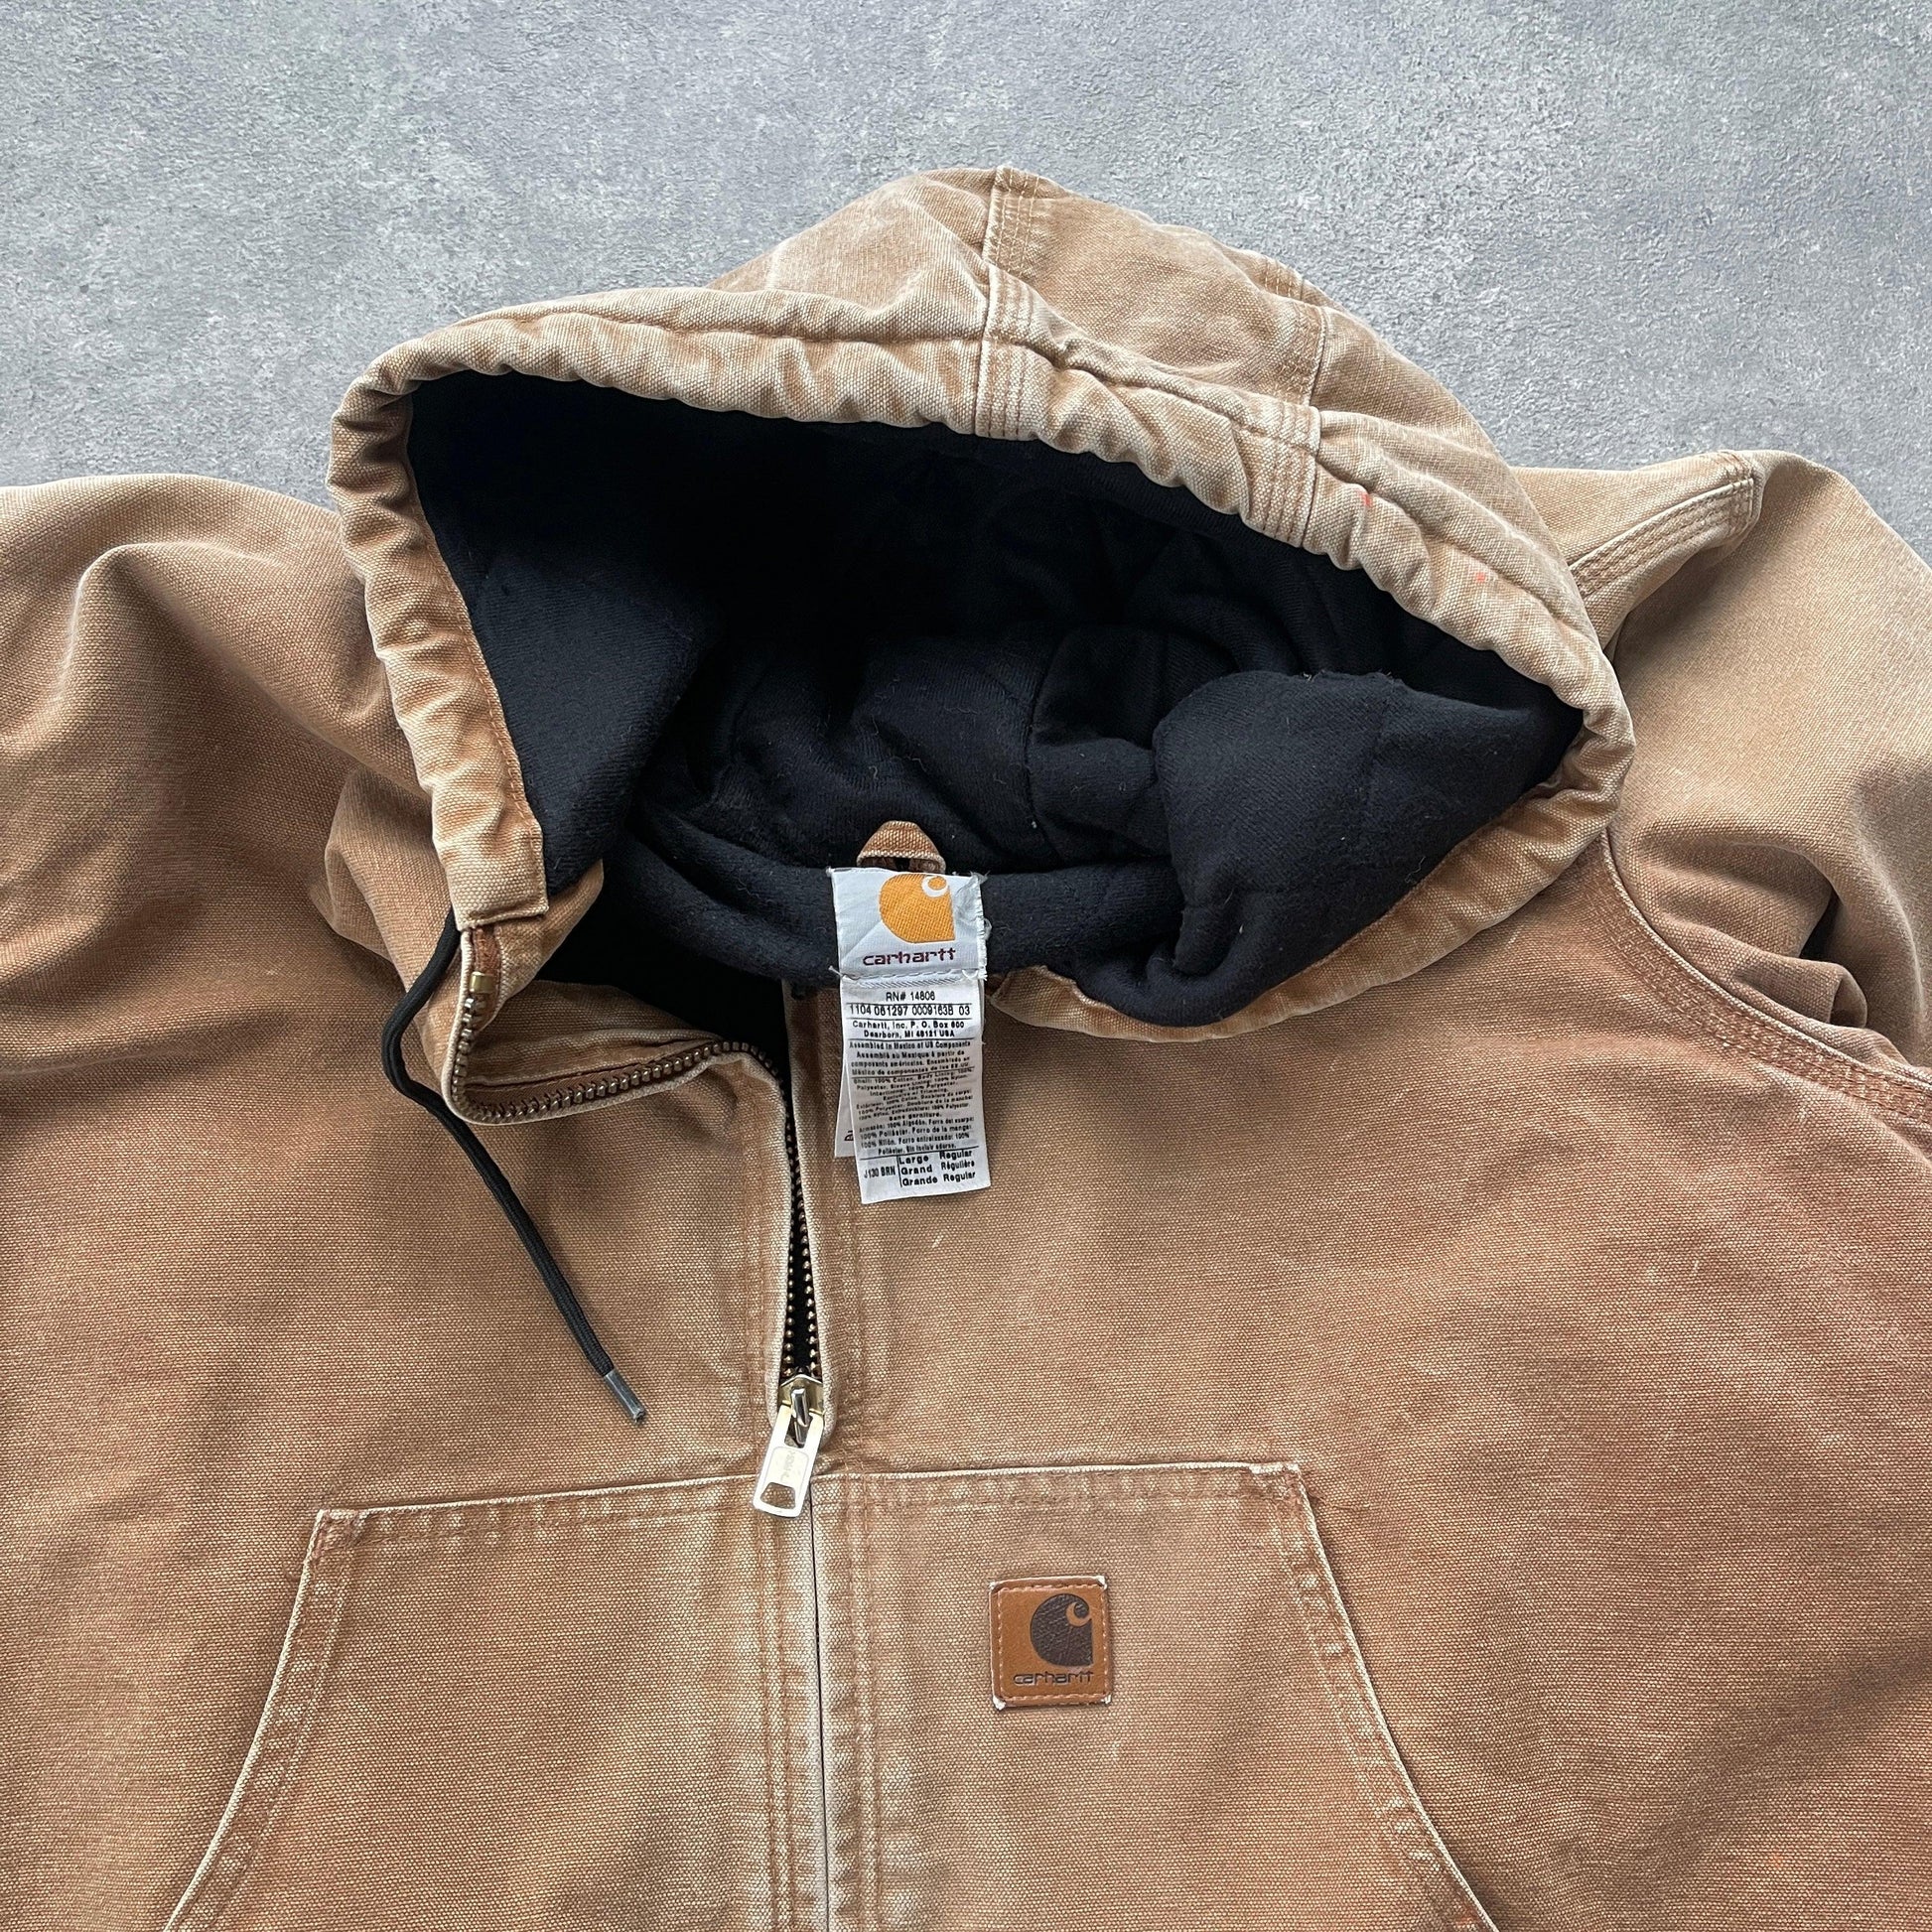 Carhartt 2004 heavyweight quilted active jacket (L) - Known Source